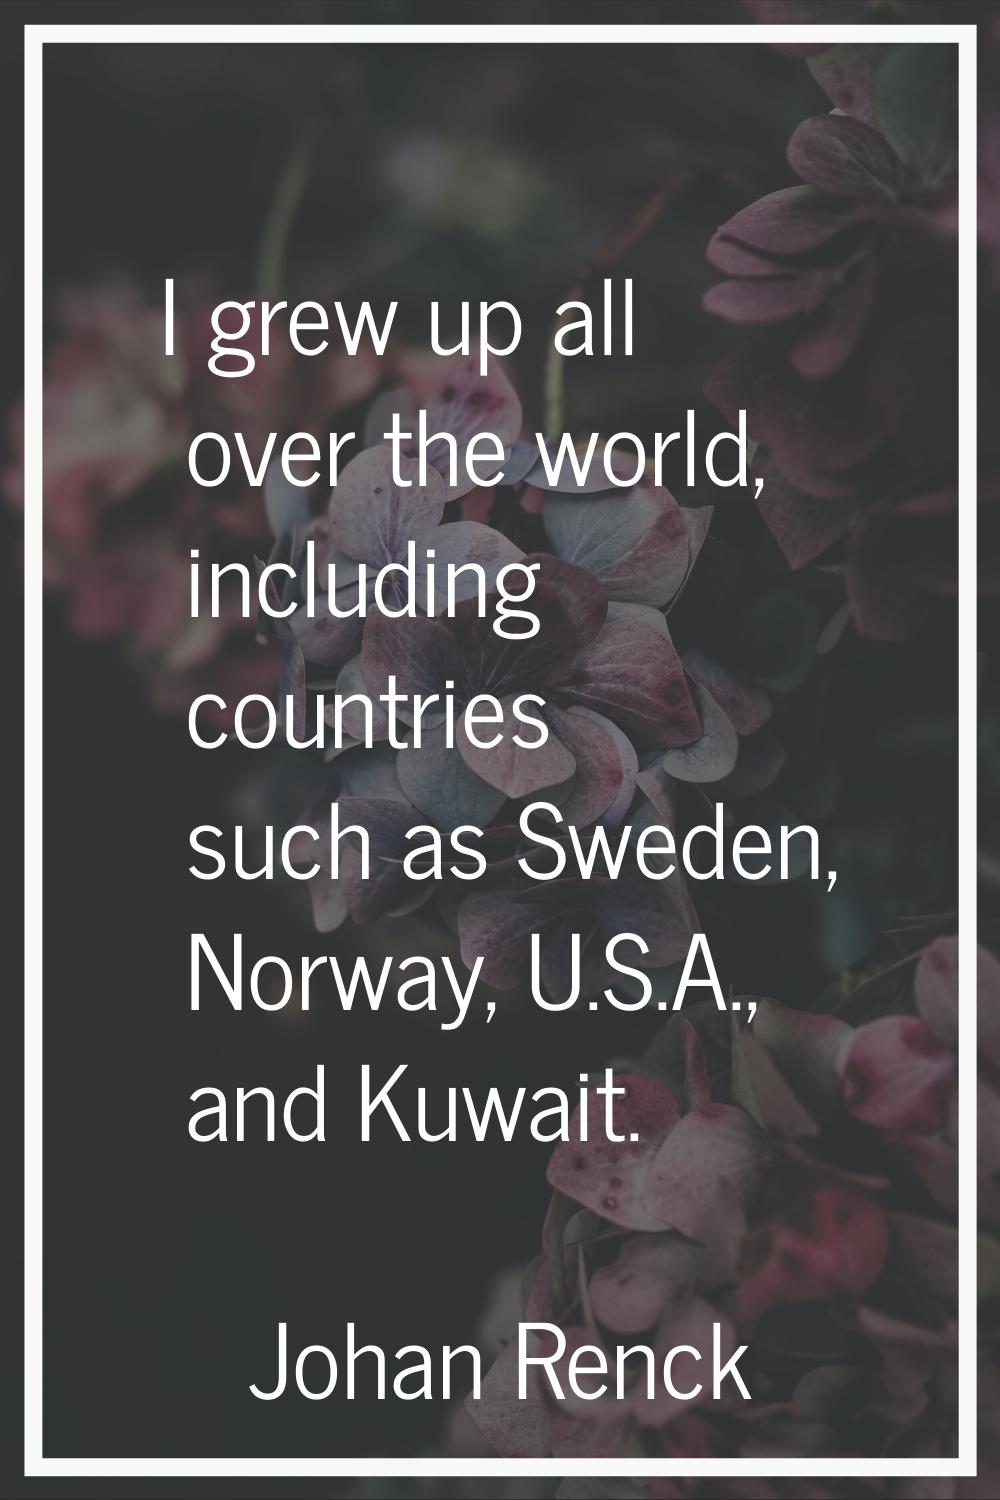 I grew up all over the world, including countries such as Sweden, Norway, U.S.A., and Kuwait.